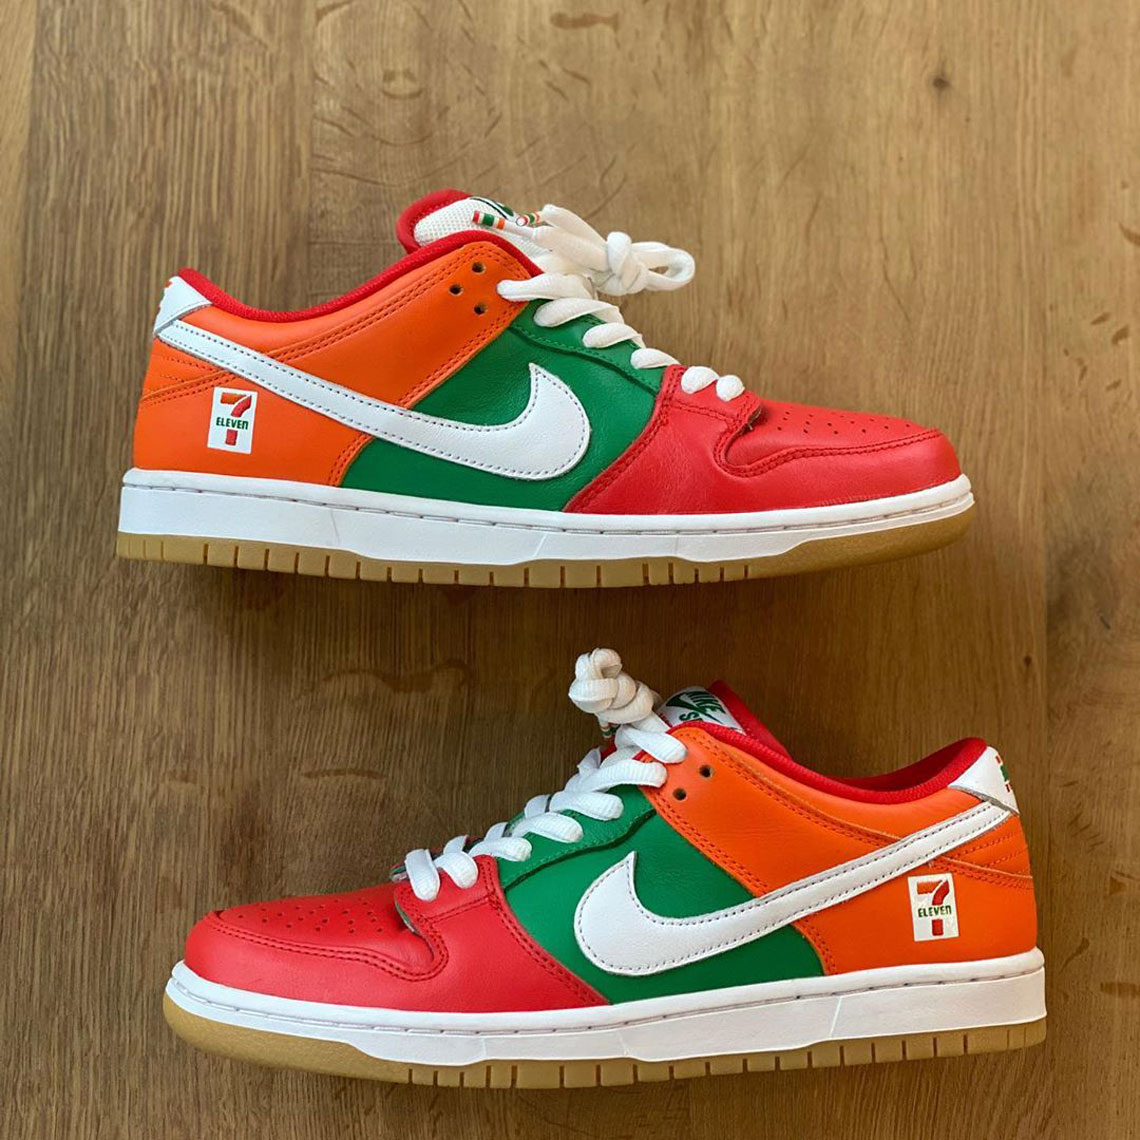 Stand up instead Butcher Elastic Nike SB Dunk Low 7-Eleven Release Date Canceled | SneakerNews.com